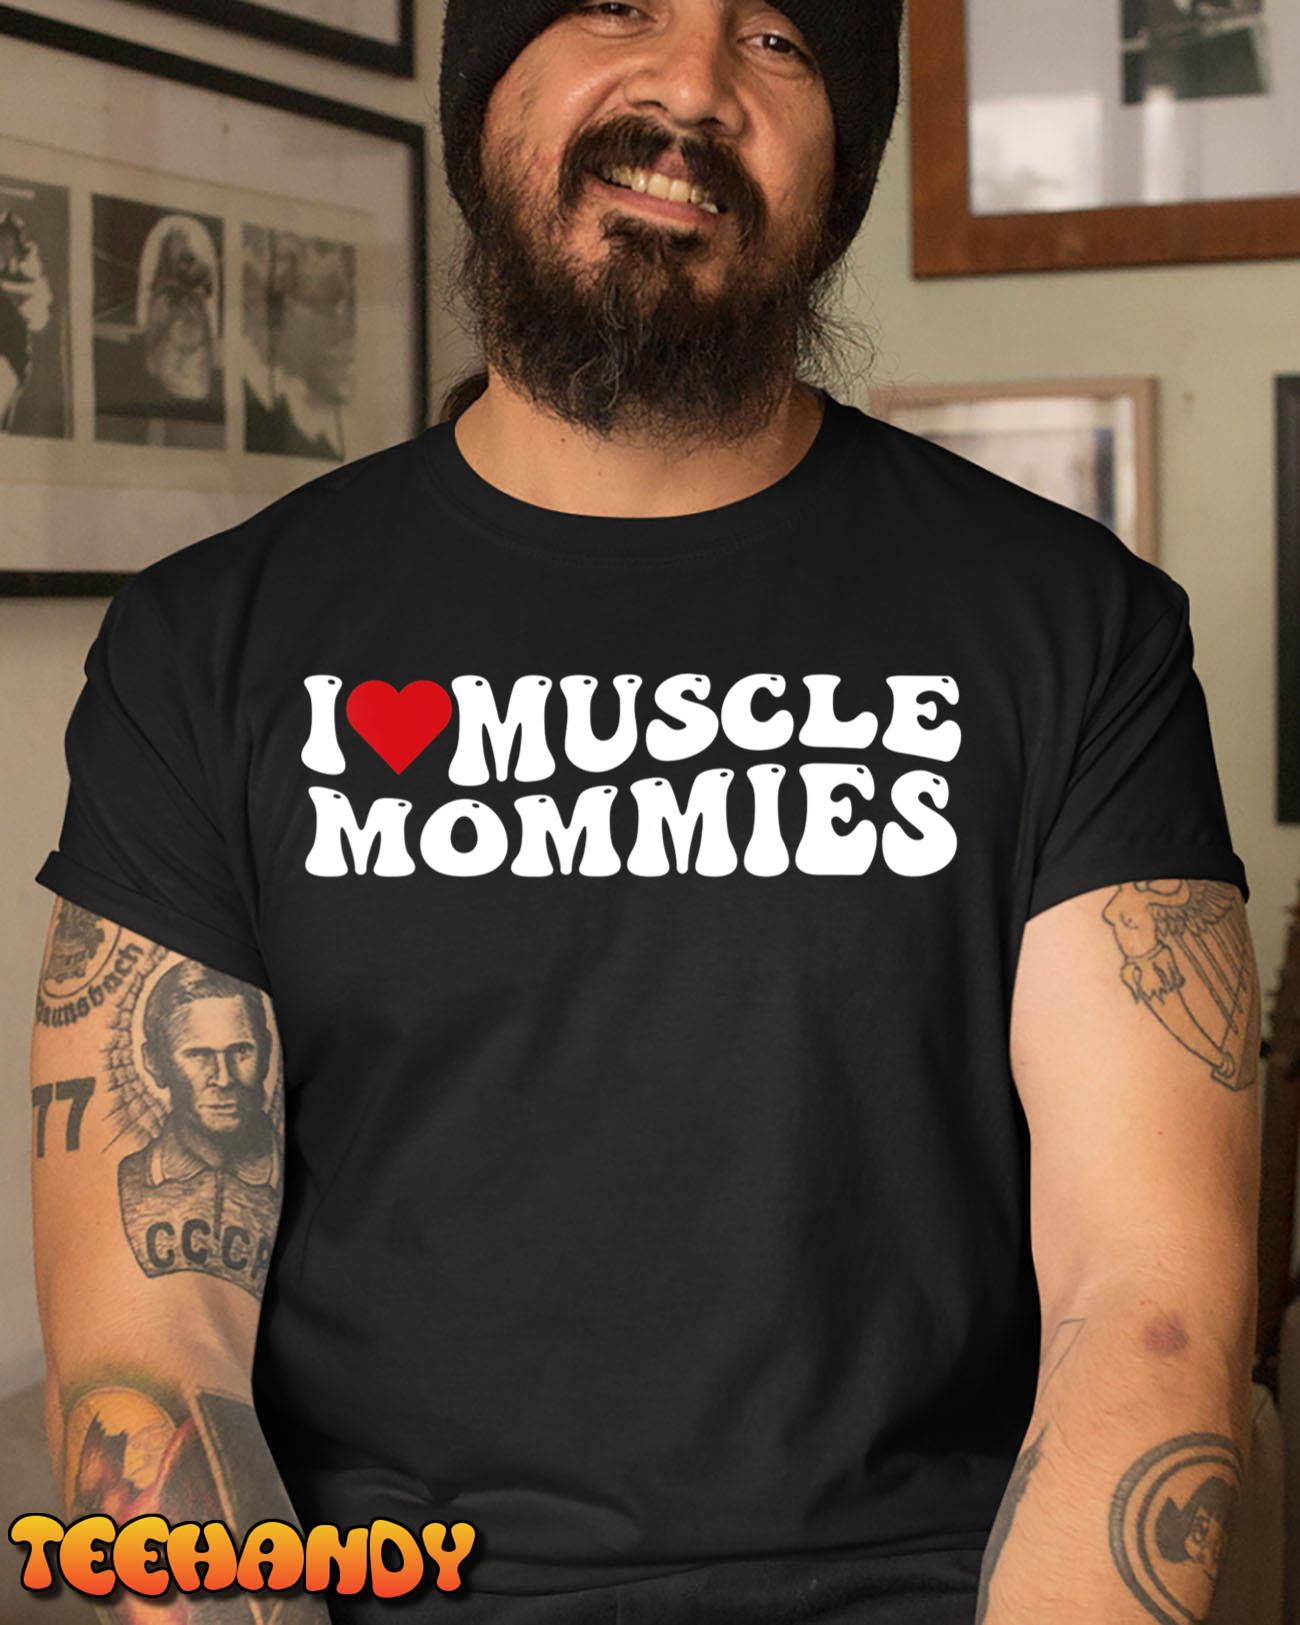 I Love Muscle Mommies Retro Groovy I Heart Muscle Mommies T-Shirt